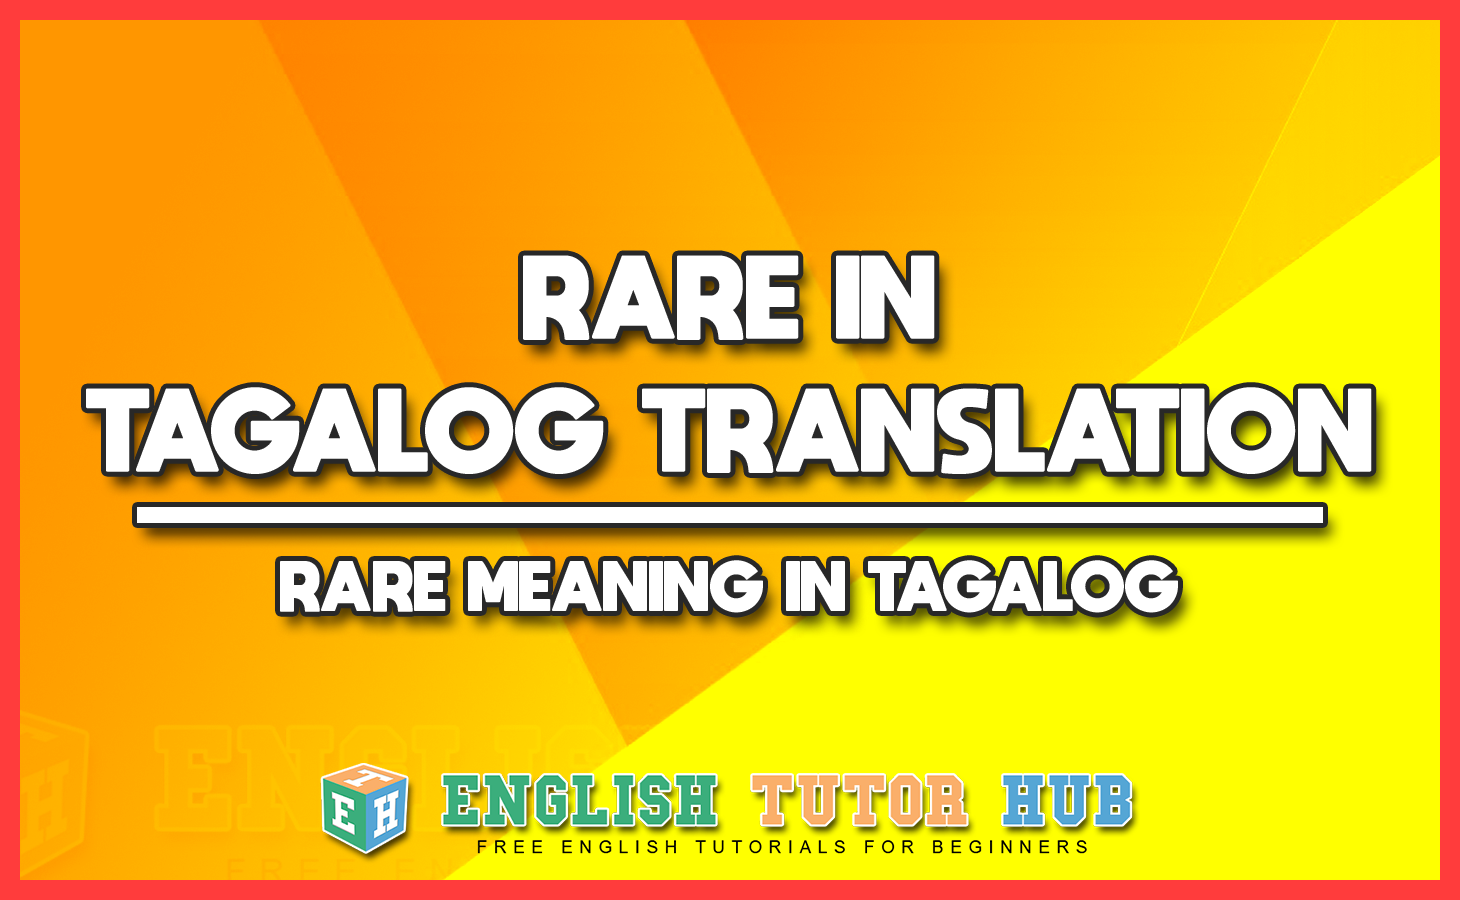 RARE IN TAGALOG TRANSLATION - RARE MEANING IN TAGALOG